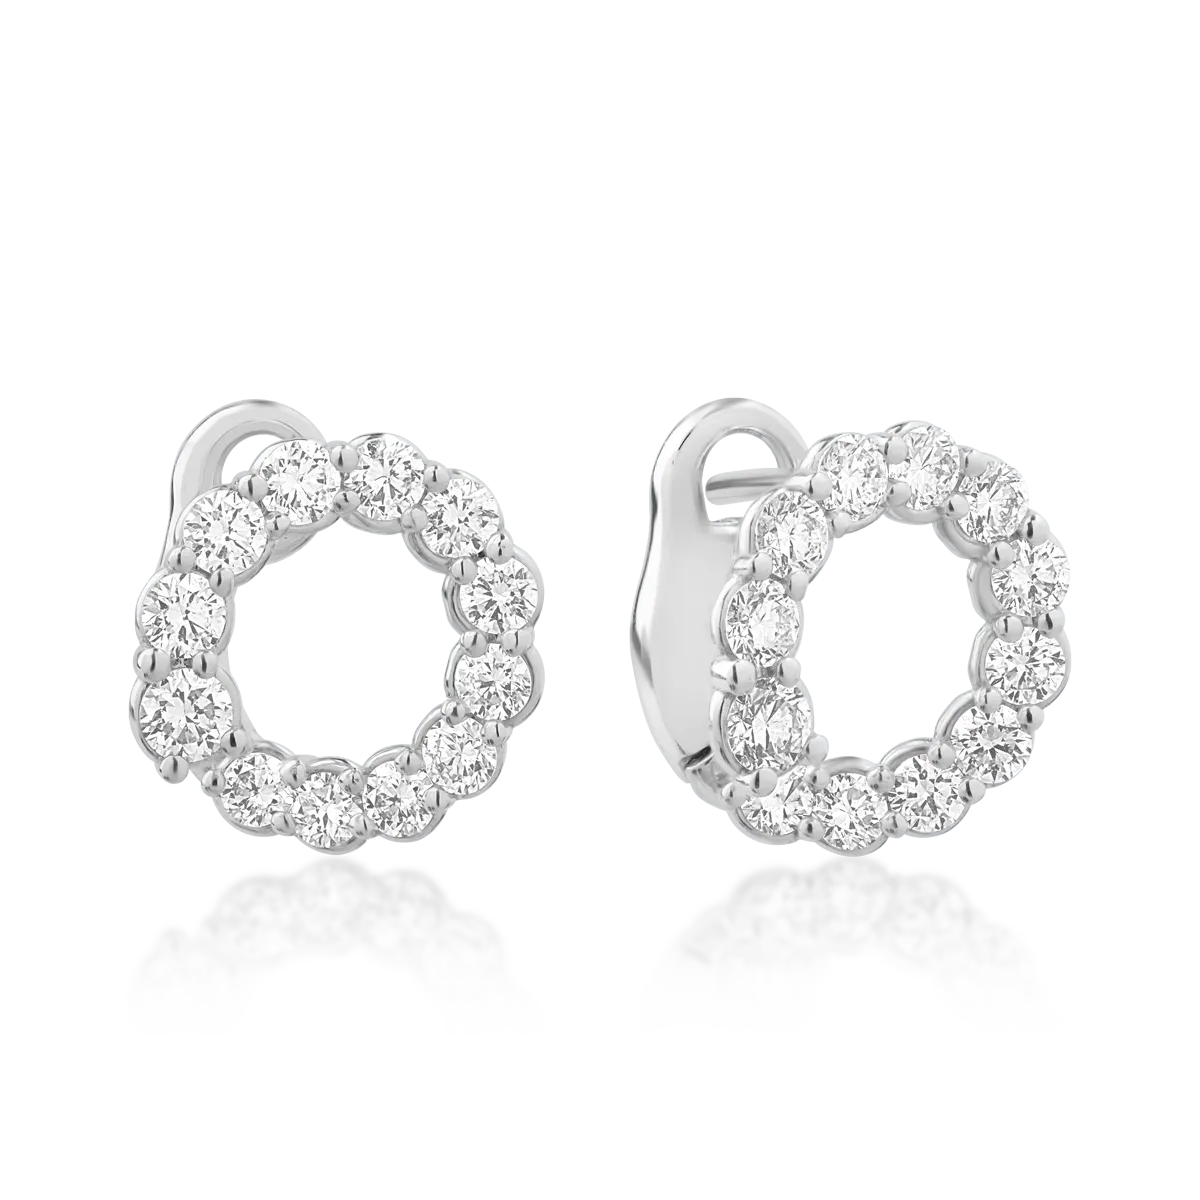 18K white gold earrings with 1ct diamonds